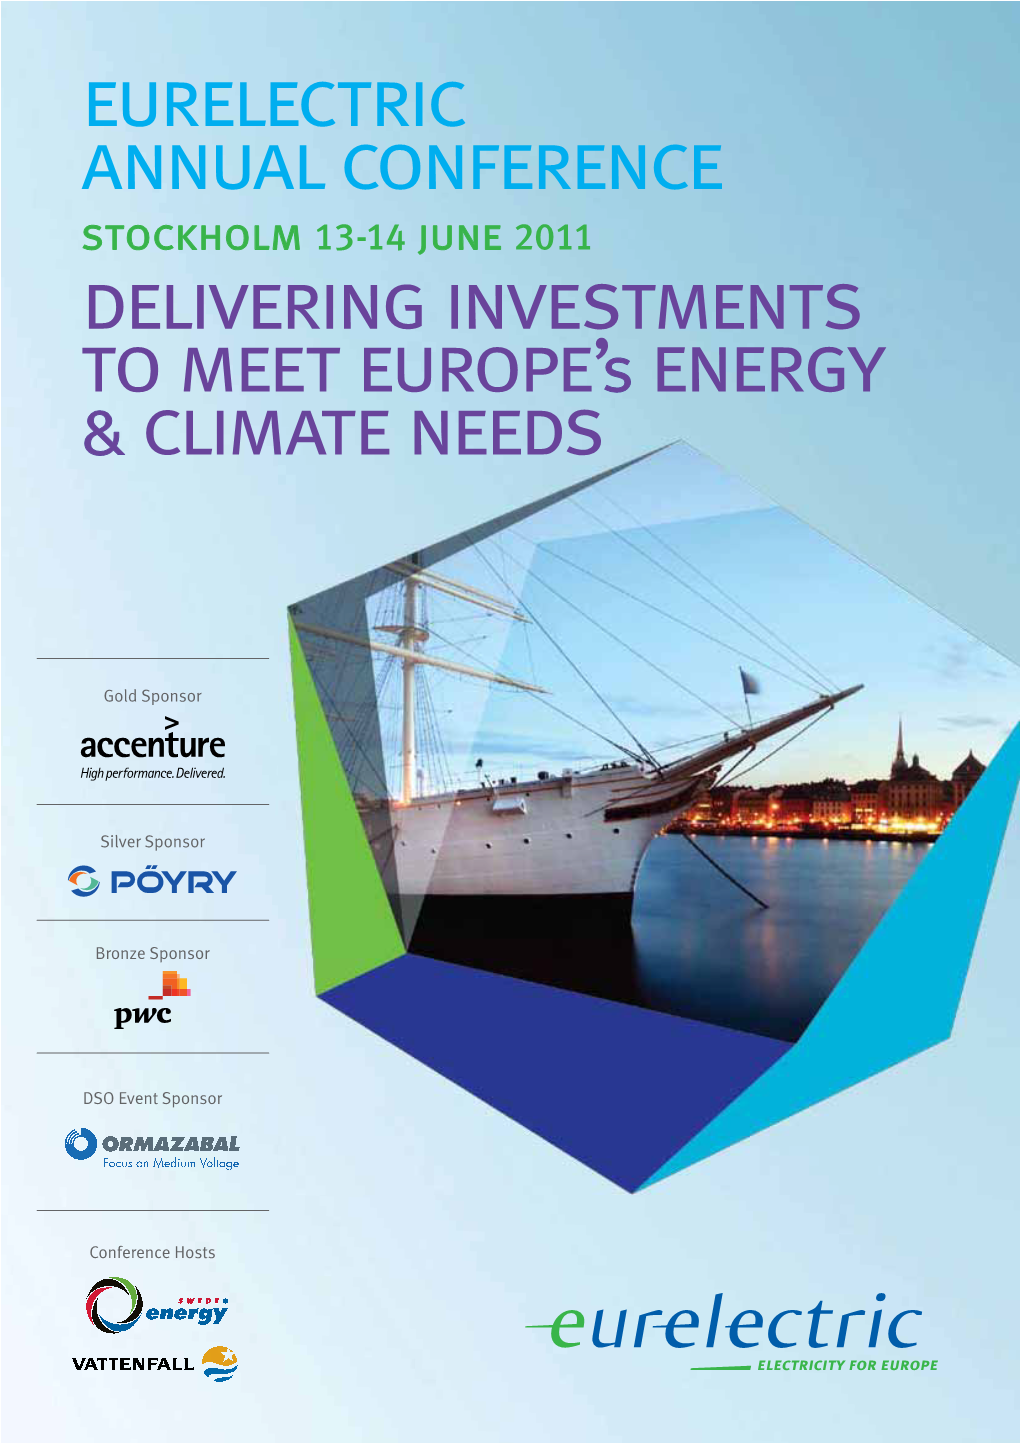 Eurelectric Annual Conference Delivering Investments to Meet